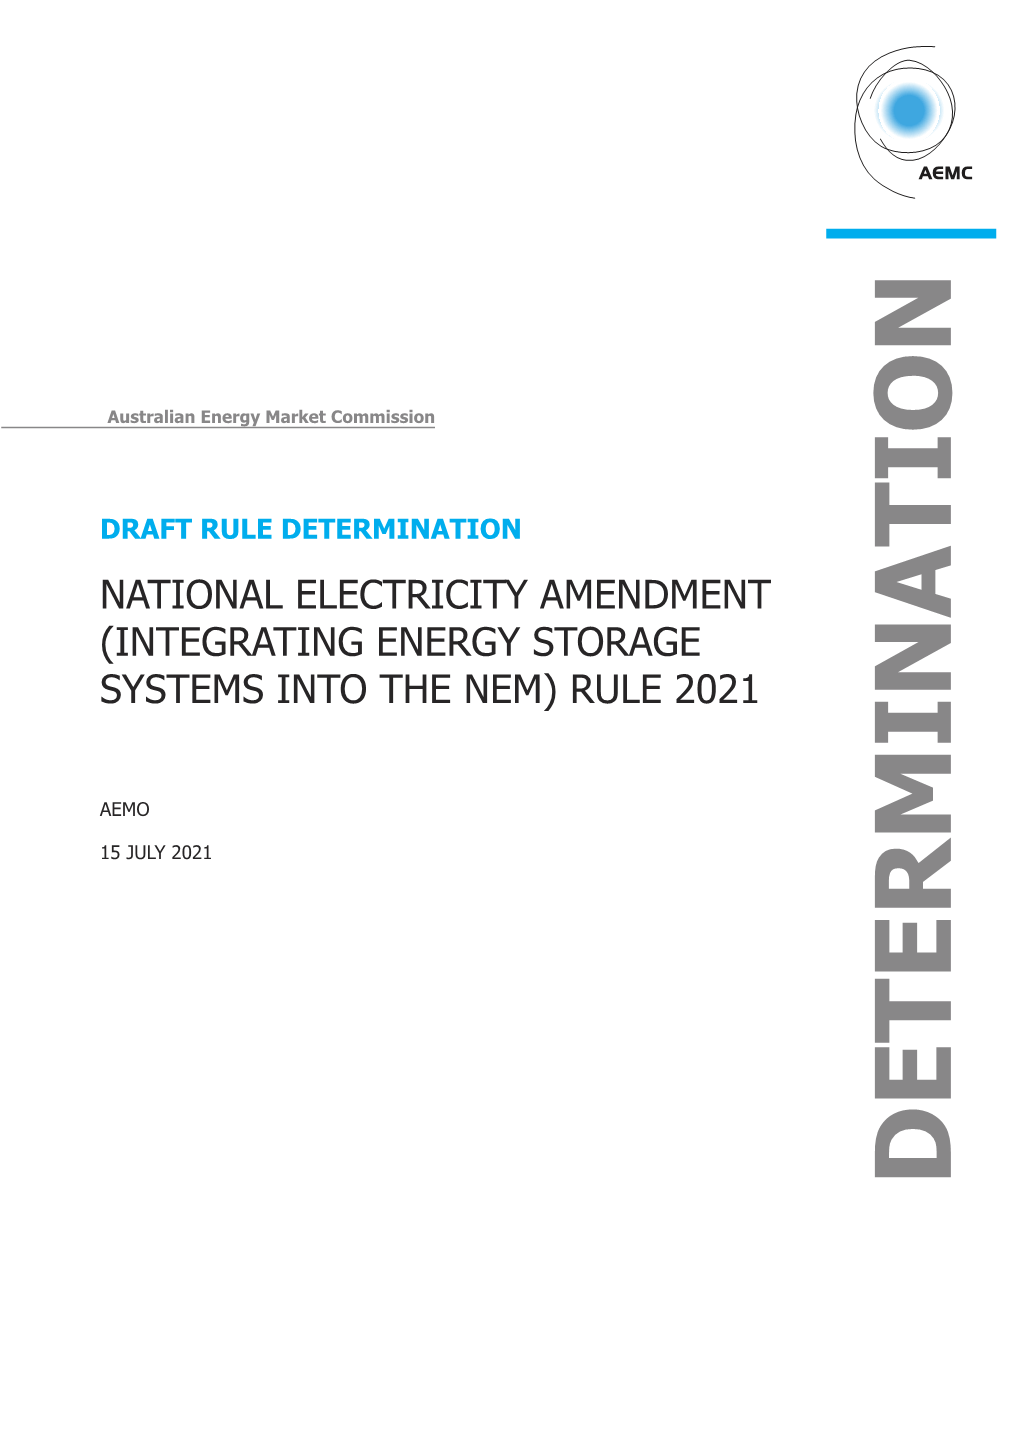 Integrating Energy Storage Systems Into the Nem) Rule 2021